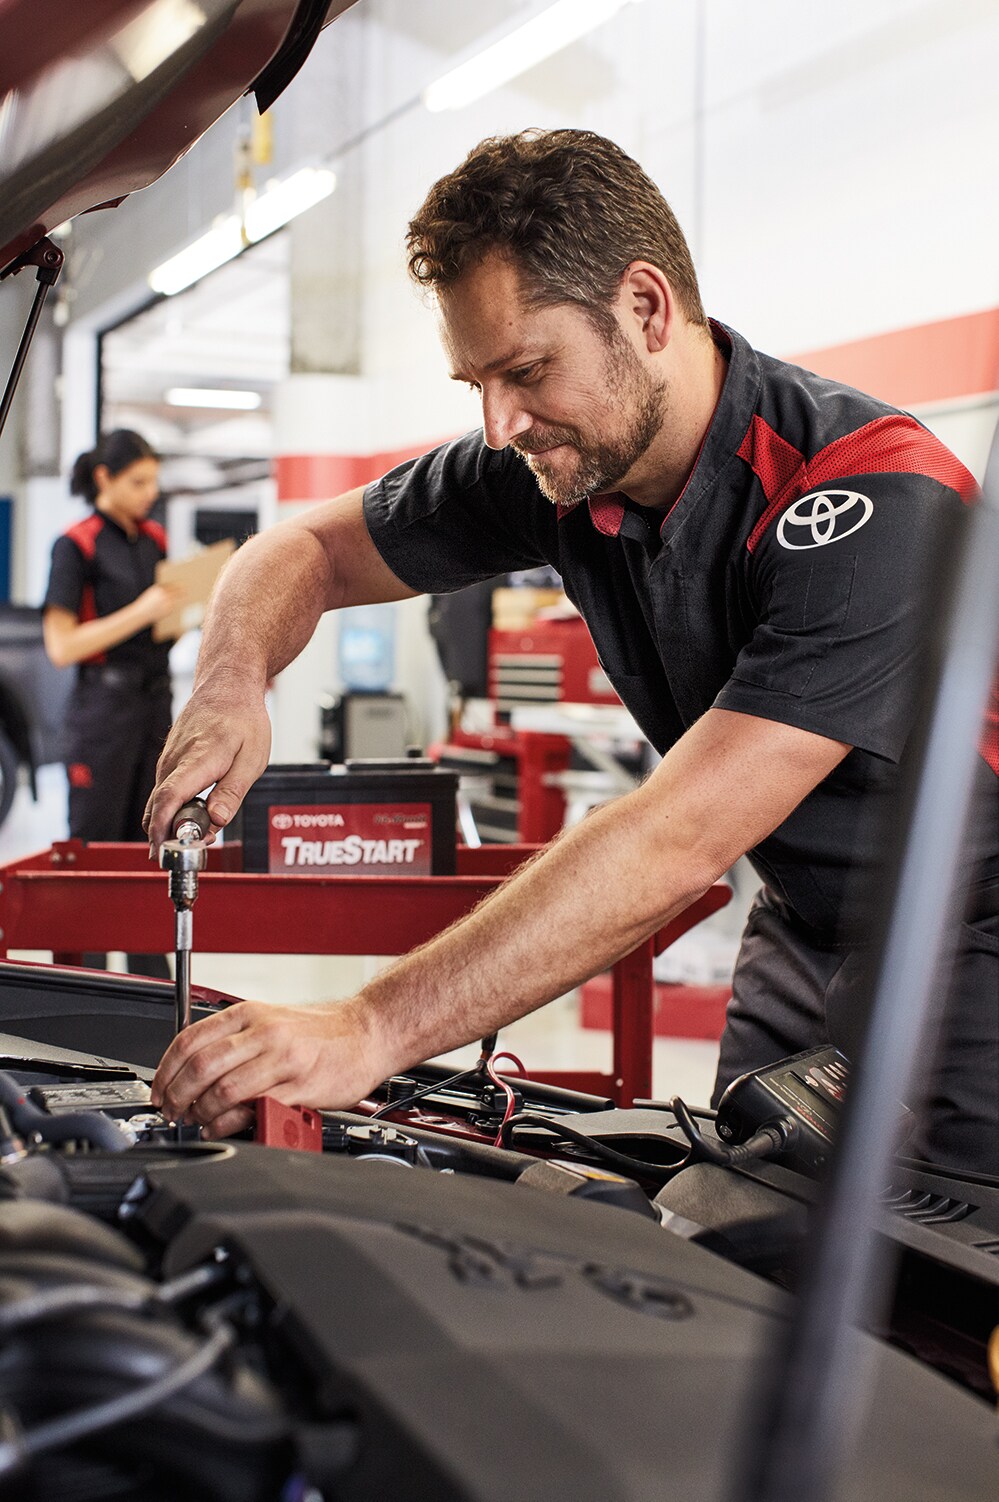 How to prepare your Toyota for the winter season in Mechanicsburg, PA at Bobby Rahal Toyota | Toyota service technician replacing battery in a Toyota vehicle